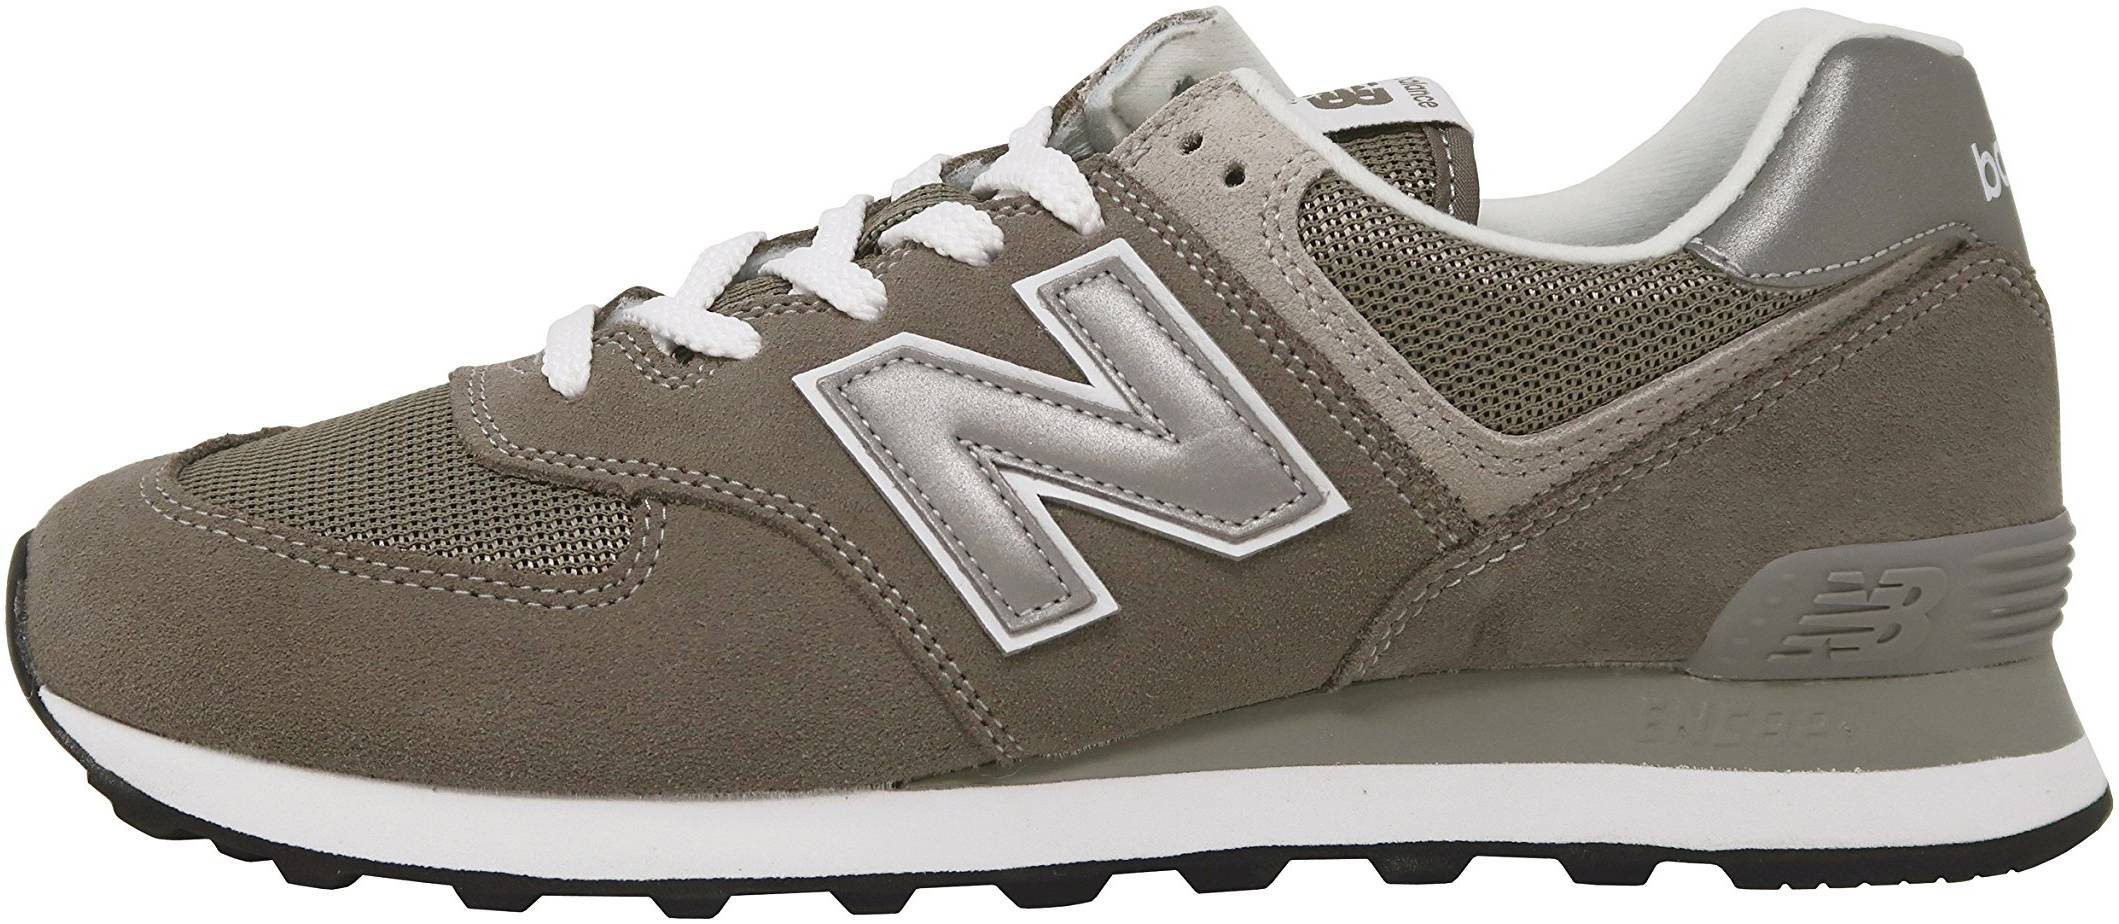 New Balance 574 sneakers in 10 colors (only $64) | RunRepeat